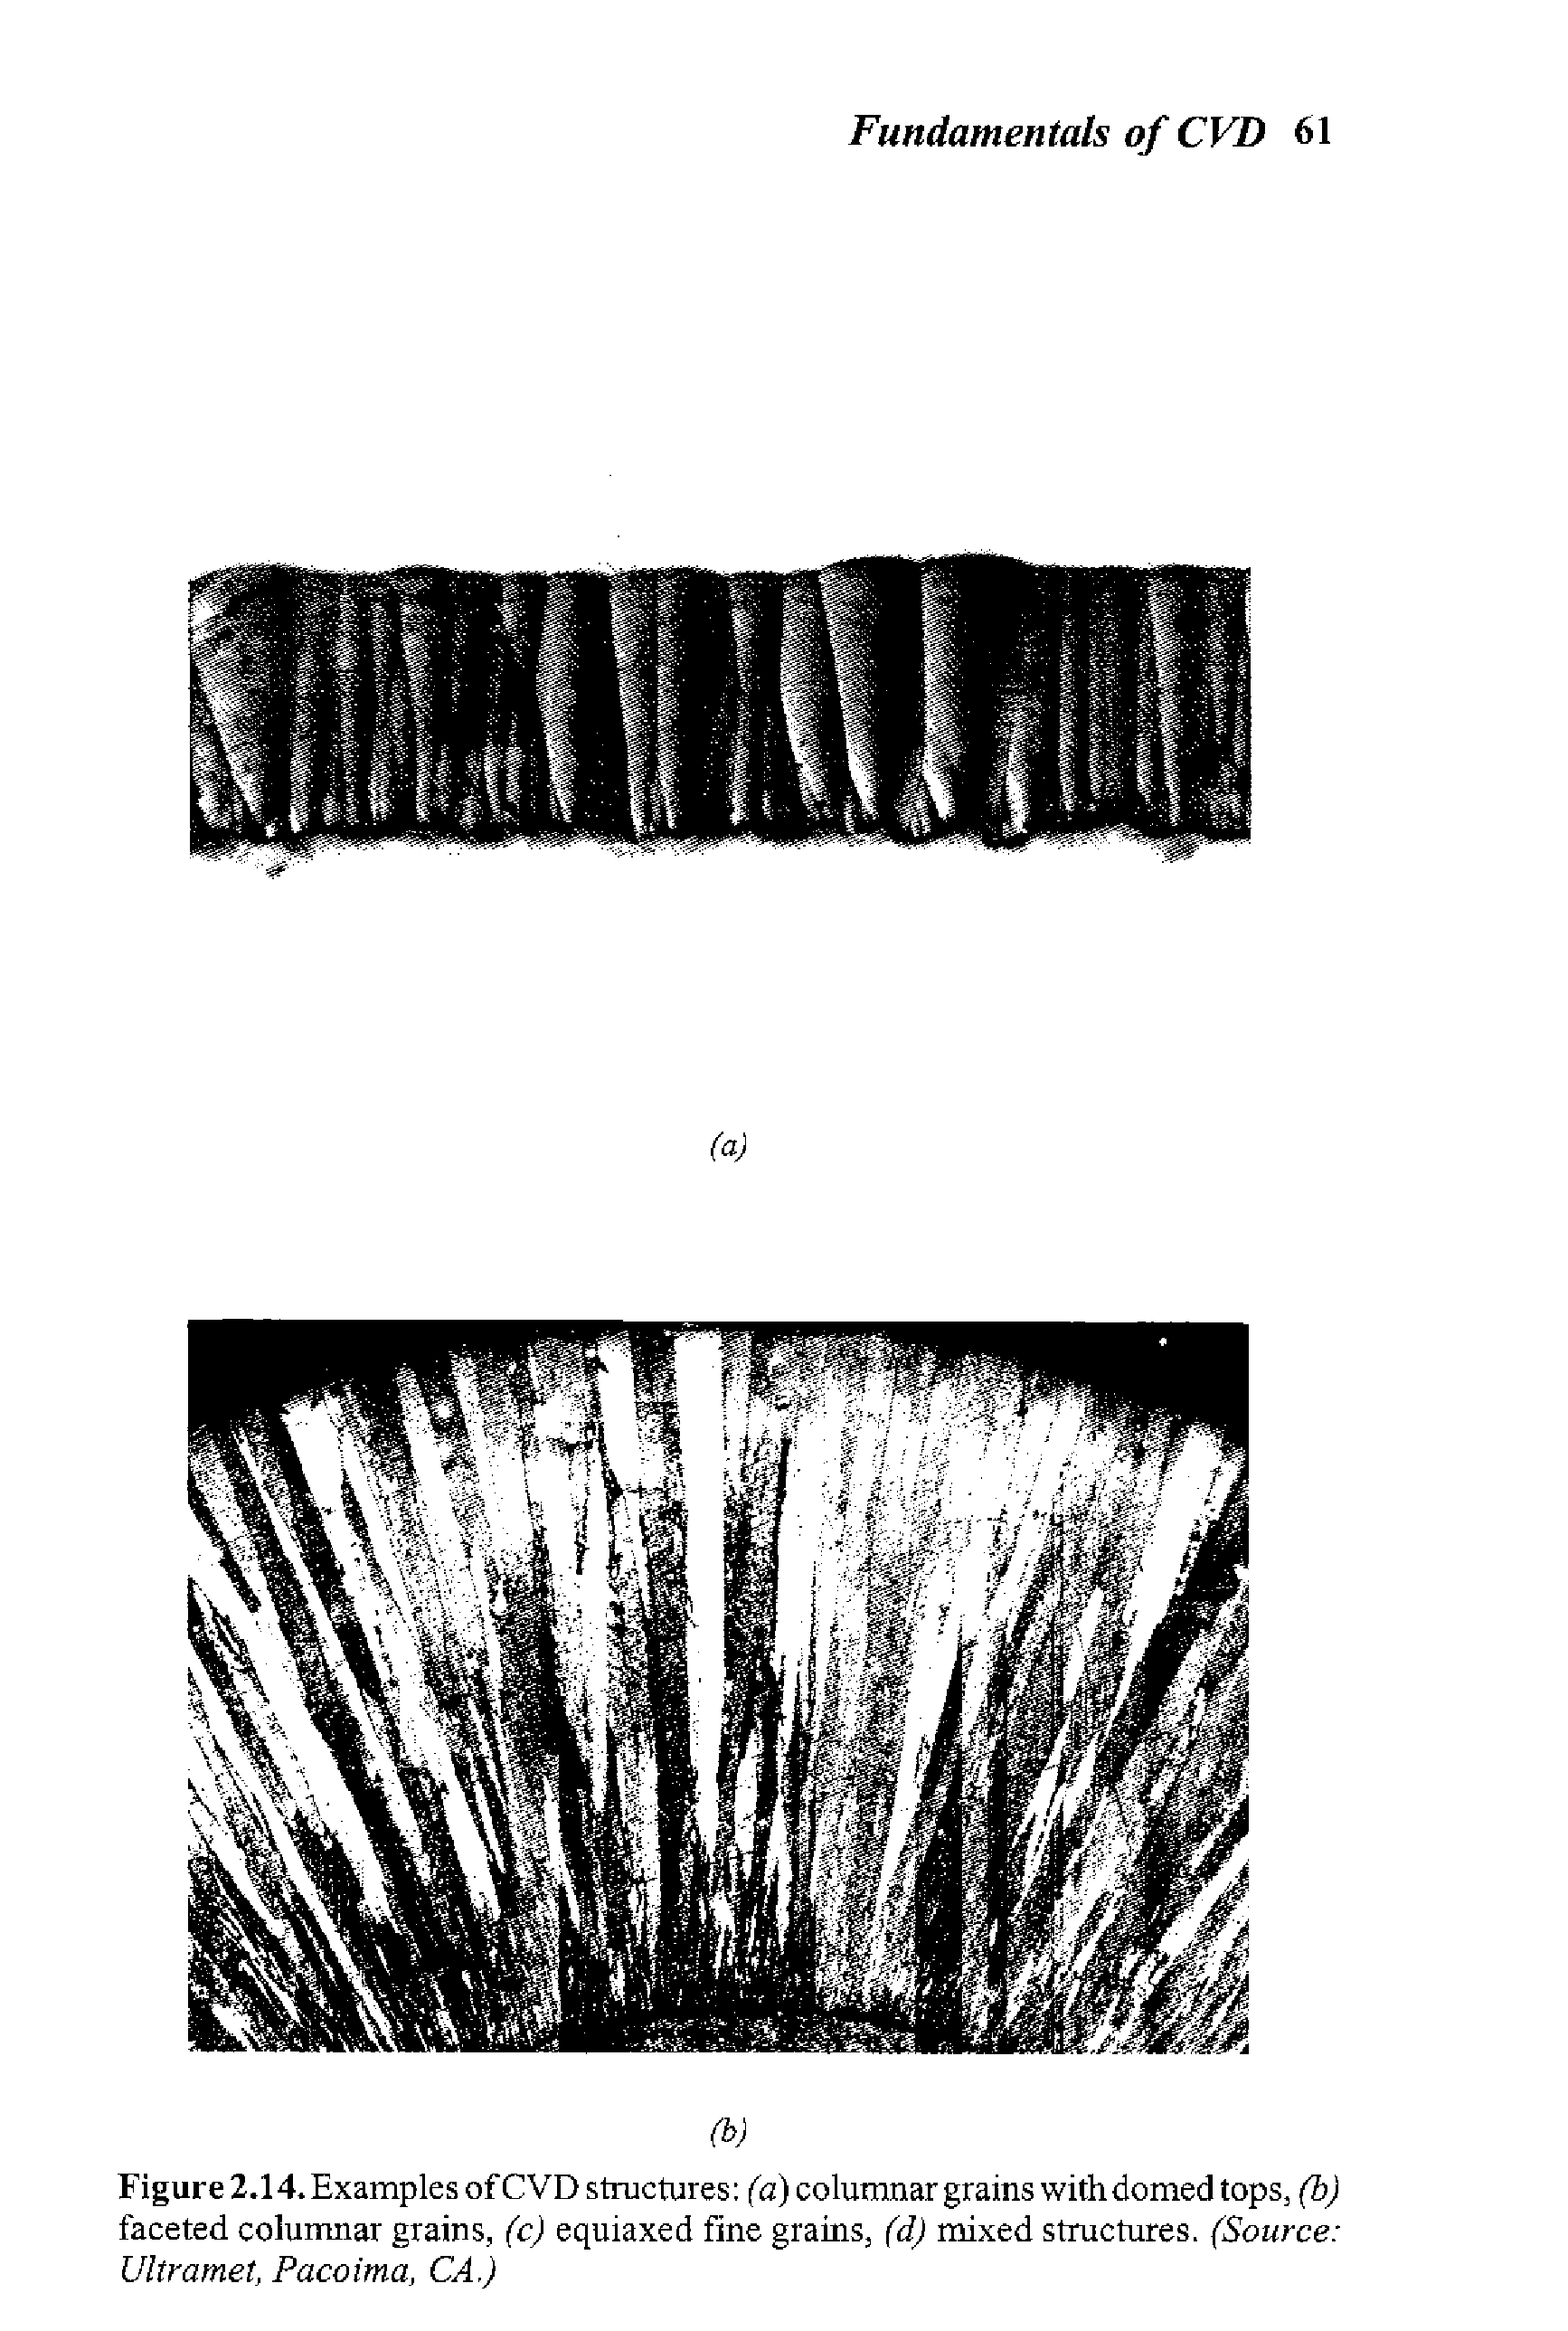 Figure 2.14. Examples of CVD structures (a) columnar grains with domed tops, (b) faceted columnar grains, (c) equiaxed fine grains, (d) mixed structures. (Source Ultramet, Pacoima, CA.)...